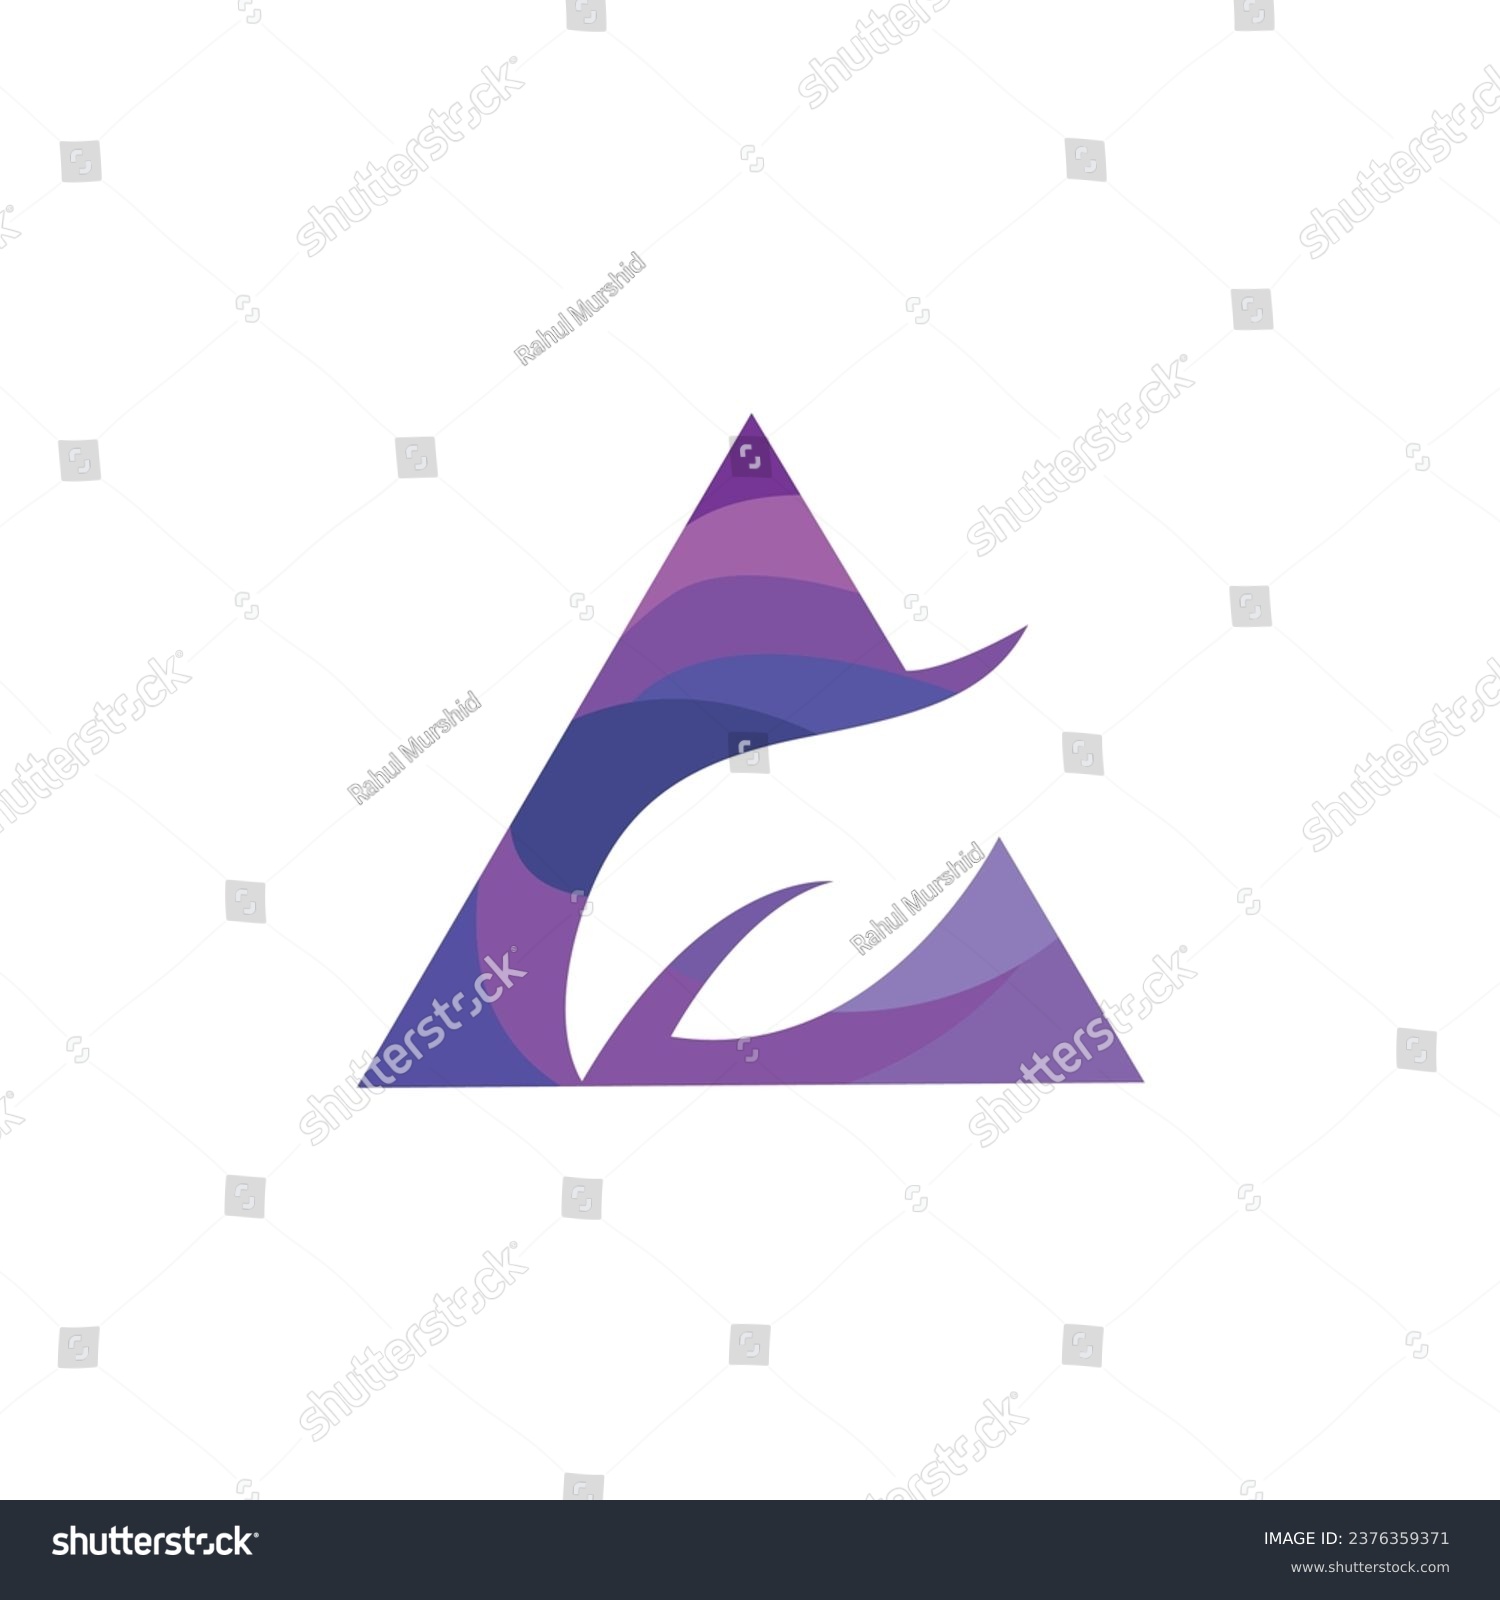 SVG of Triangle with Leaf Colorful  Concept illustration Vector Template. Suitable for Creative Industry, Multimedia, entertainment, Educations, Shop, and any related business. svg